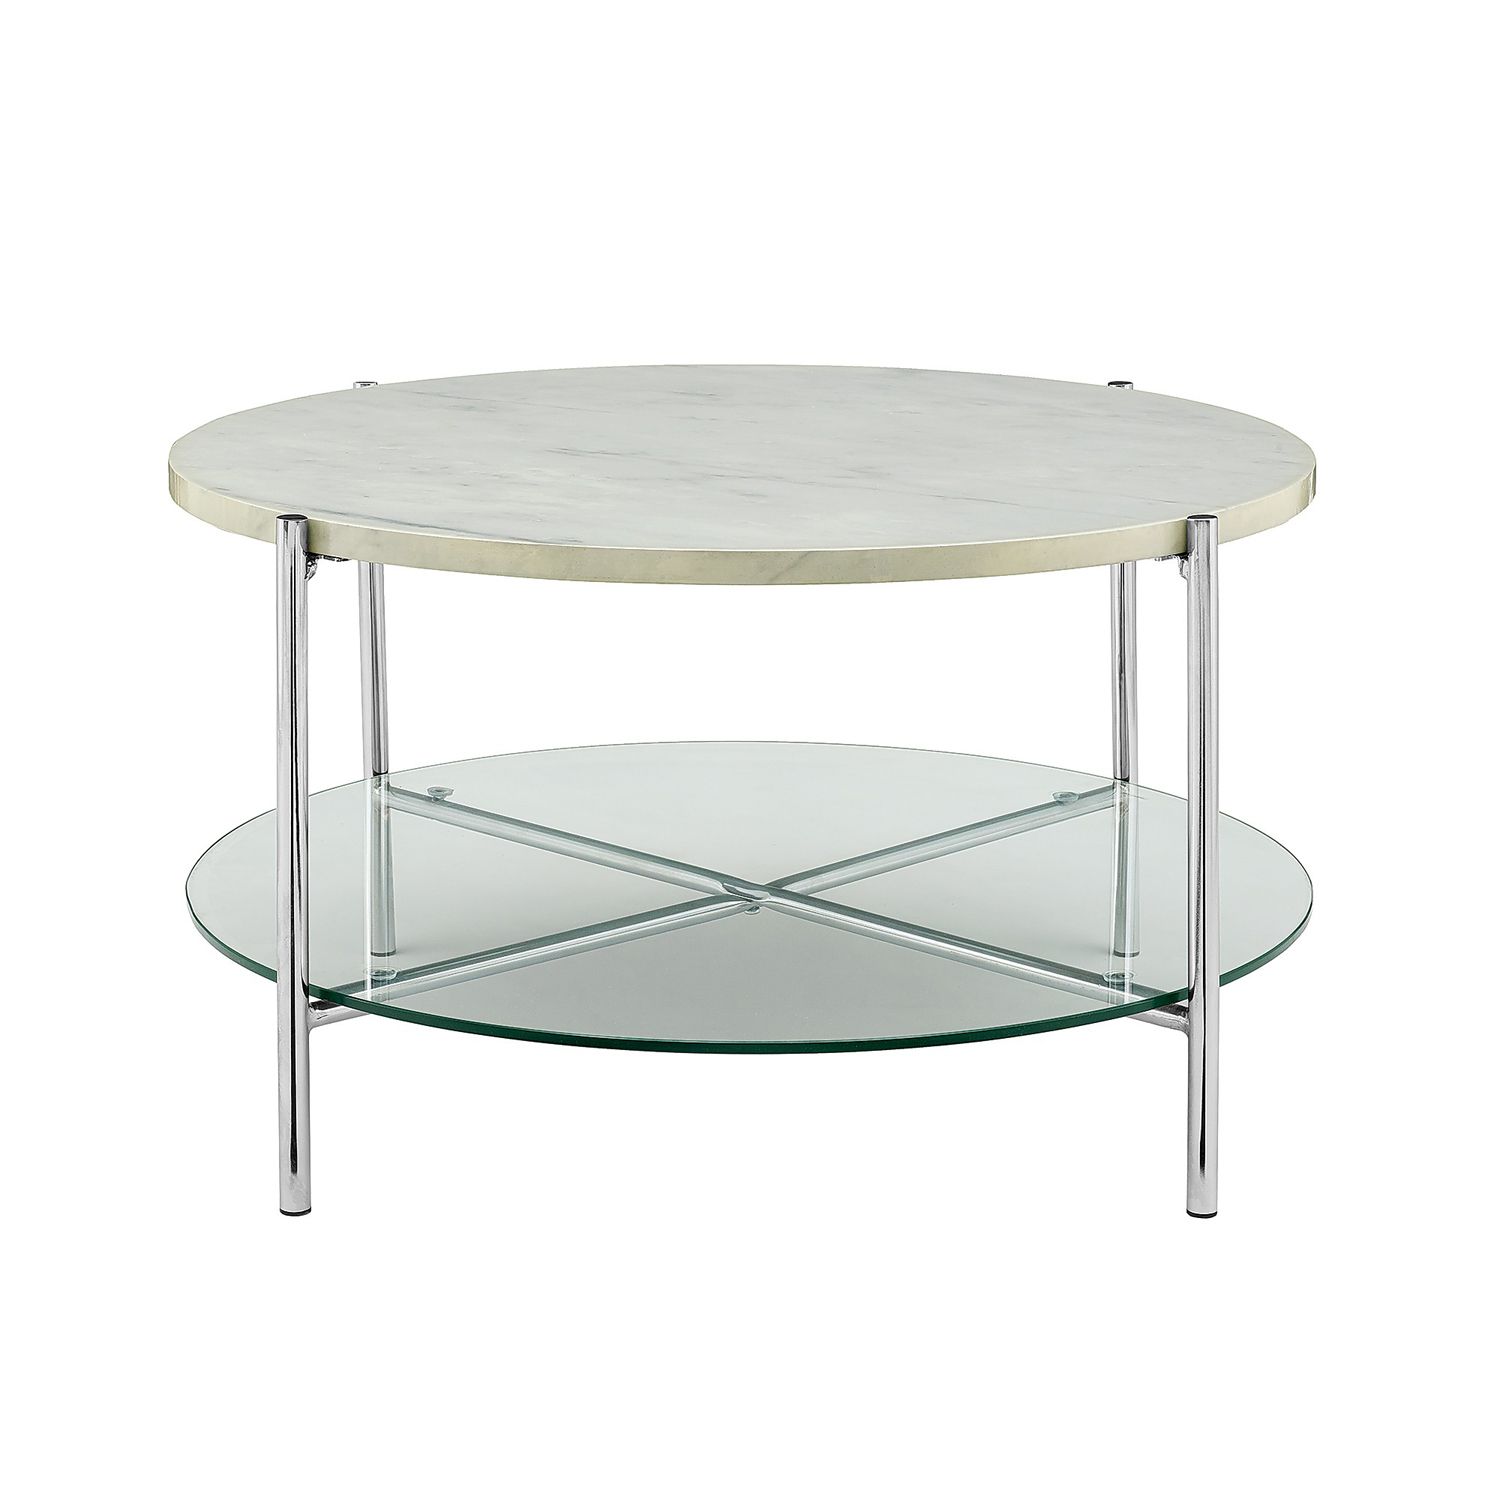 Faux Marble Round Coffee Table – Pier1 With Modern Round Faux Marble Coffee Tables (View 17 of 20)